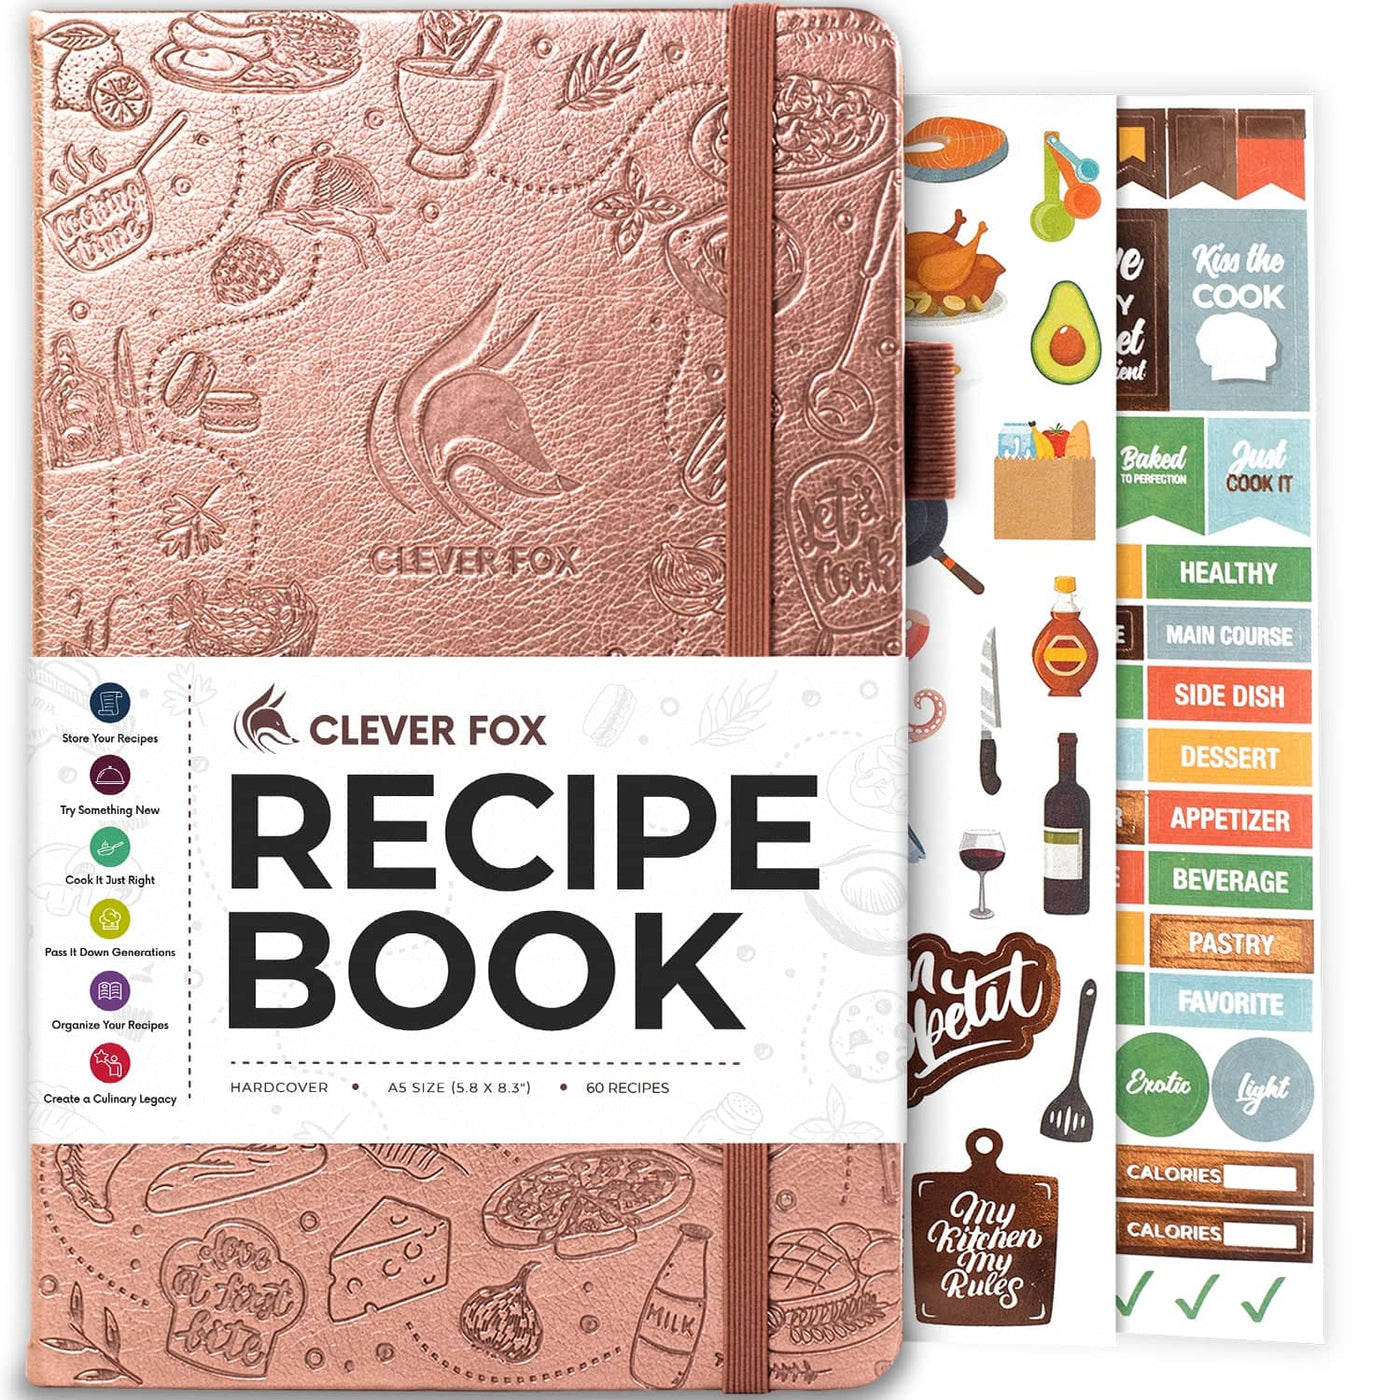 My Recipes: Blank Recipe Book For Mom To Write In - Big Empty Two Page Custom  Cook Book Journal (Paperback)